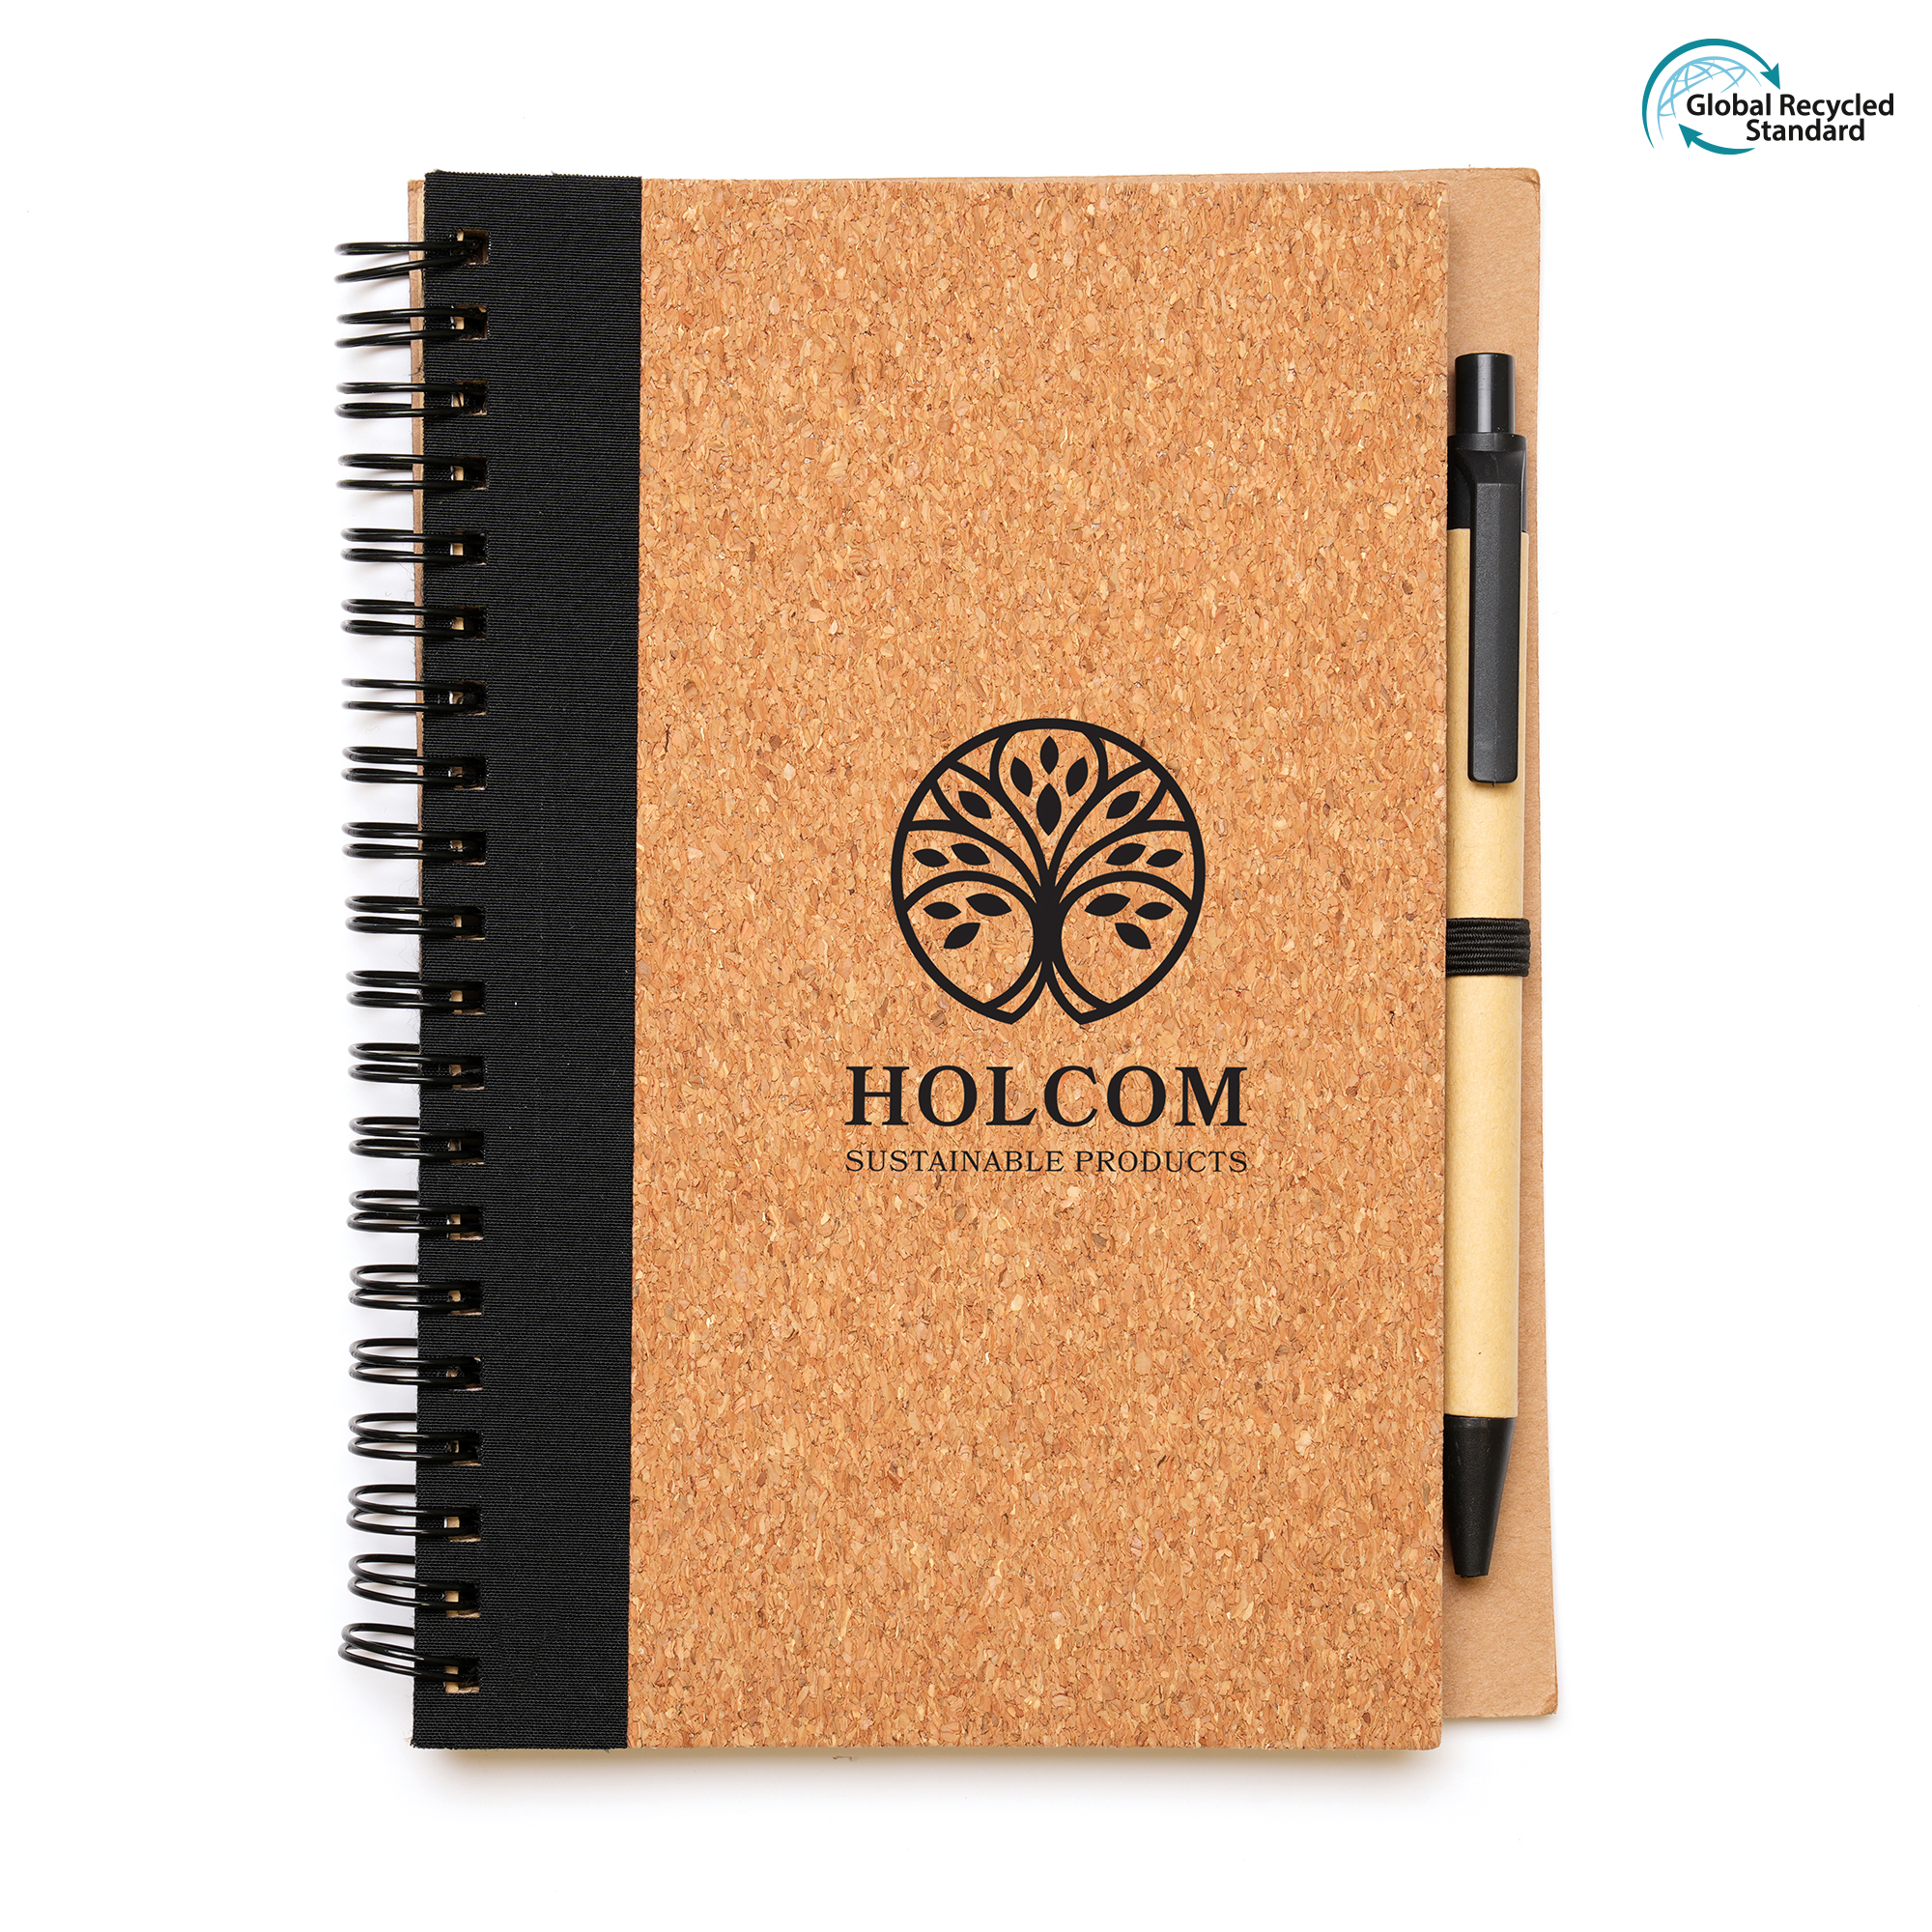 B6 eco-friendly spiral bound notebook with a natural cork cover, 70 lined recycled Kraft sheets with pre-printed eco message, pen loop and a PLA plastic pen with recycled paper body and black ink.